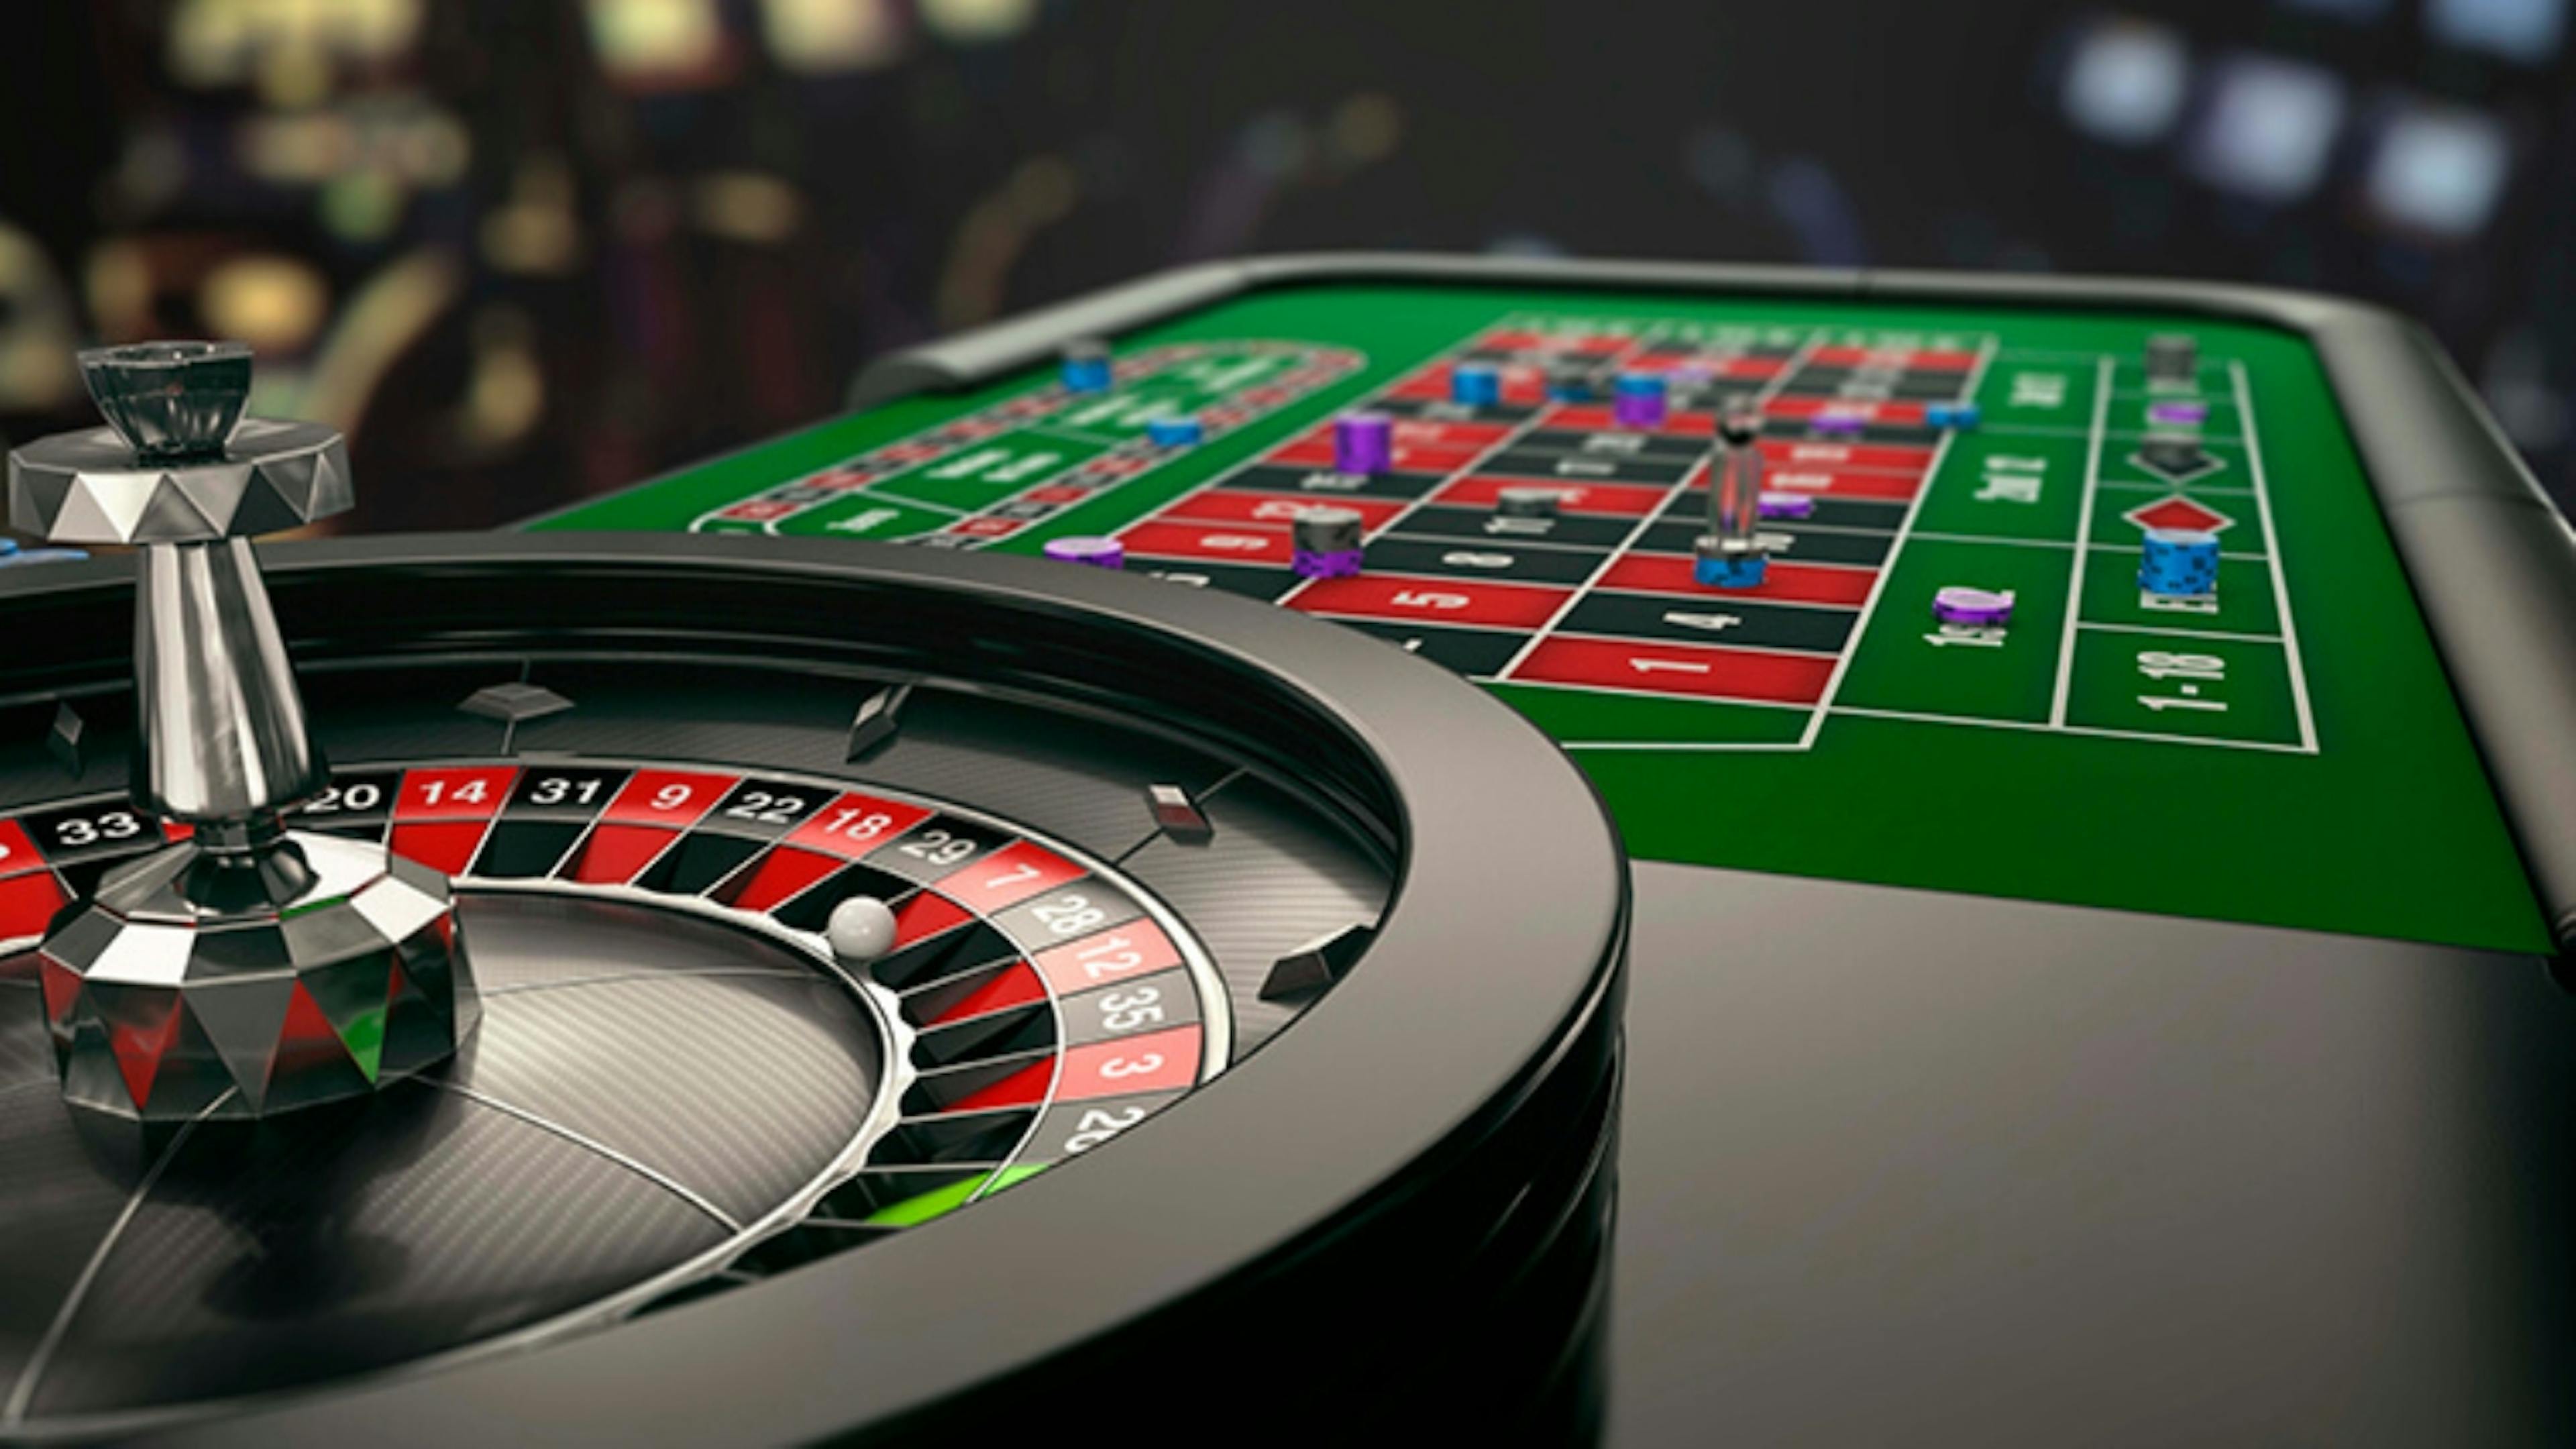 featured image - Winning in Online Skilled Gaming… Err… Gambling! Behold the Bet Auto Stopper 